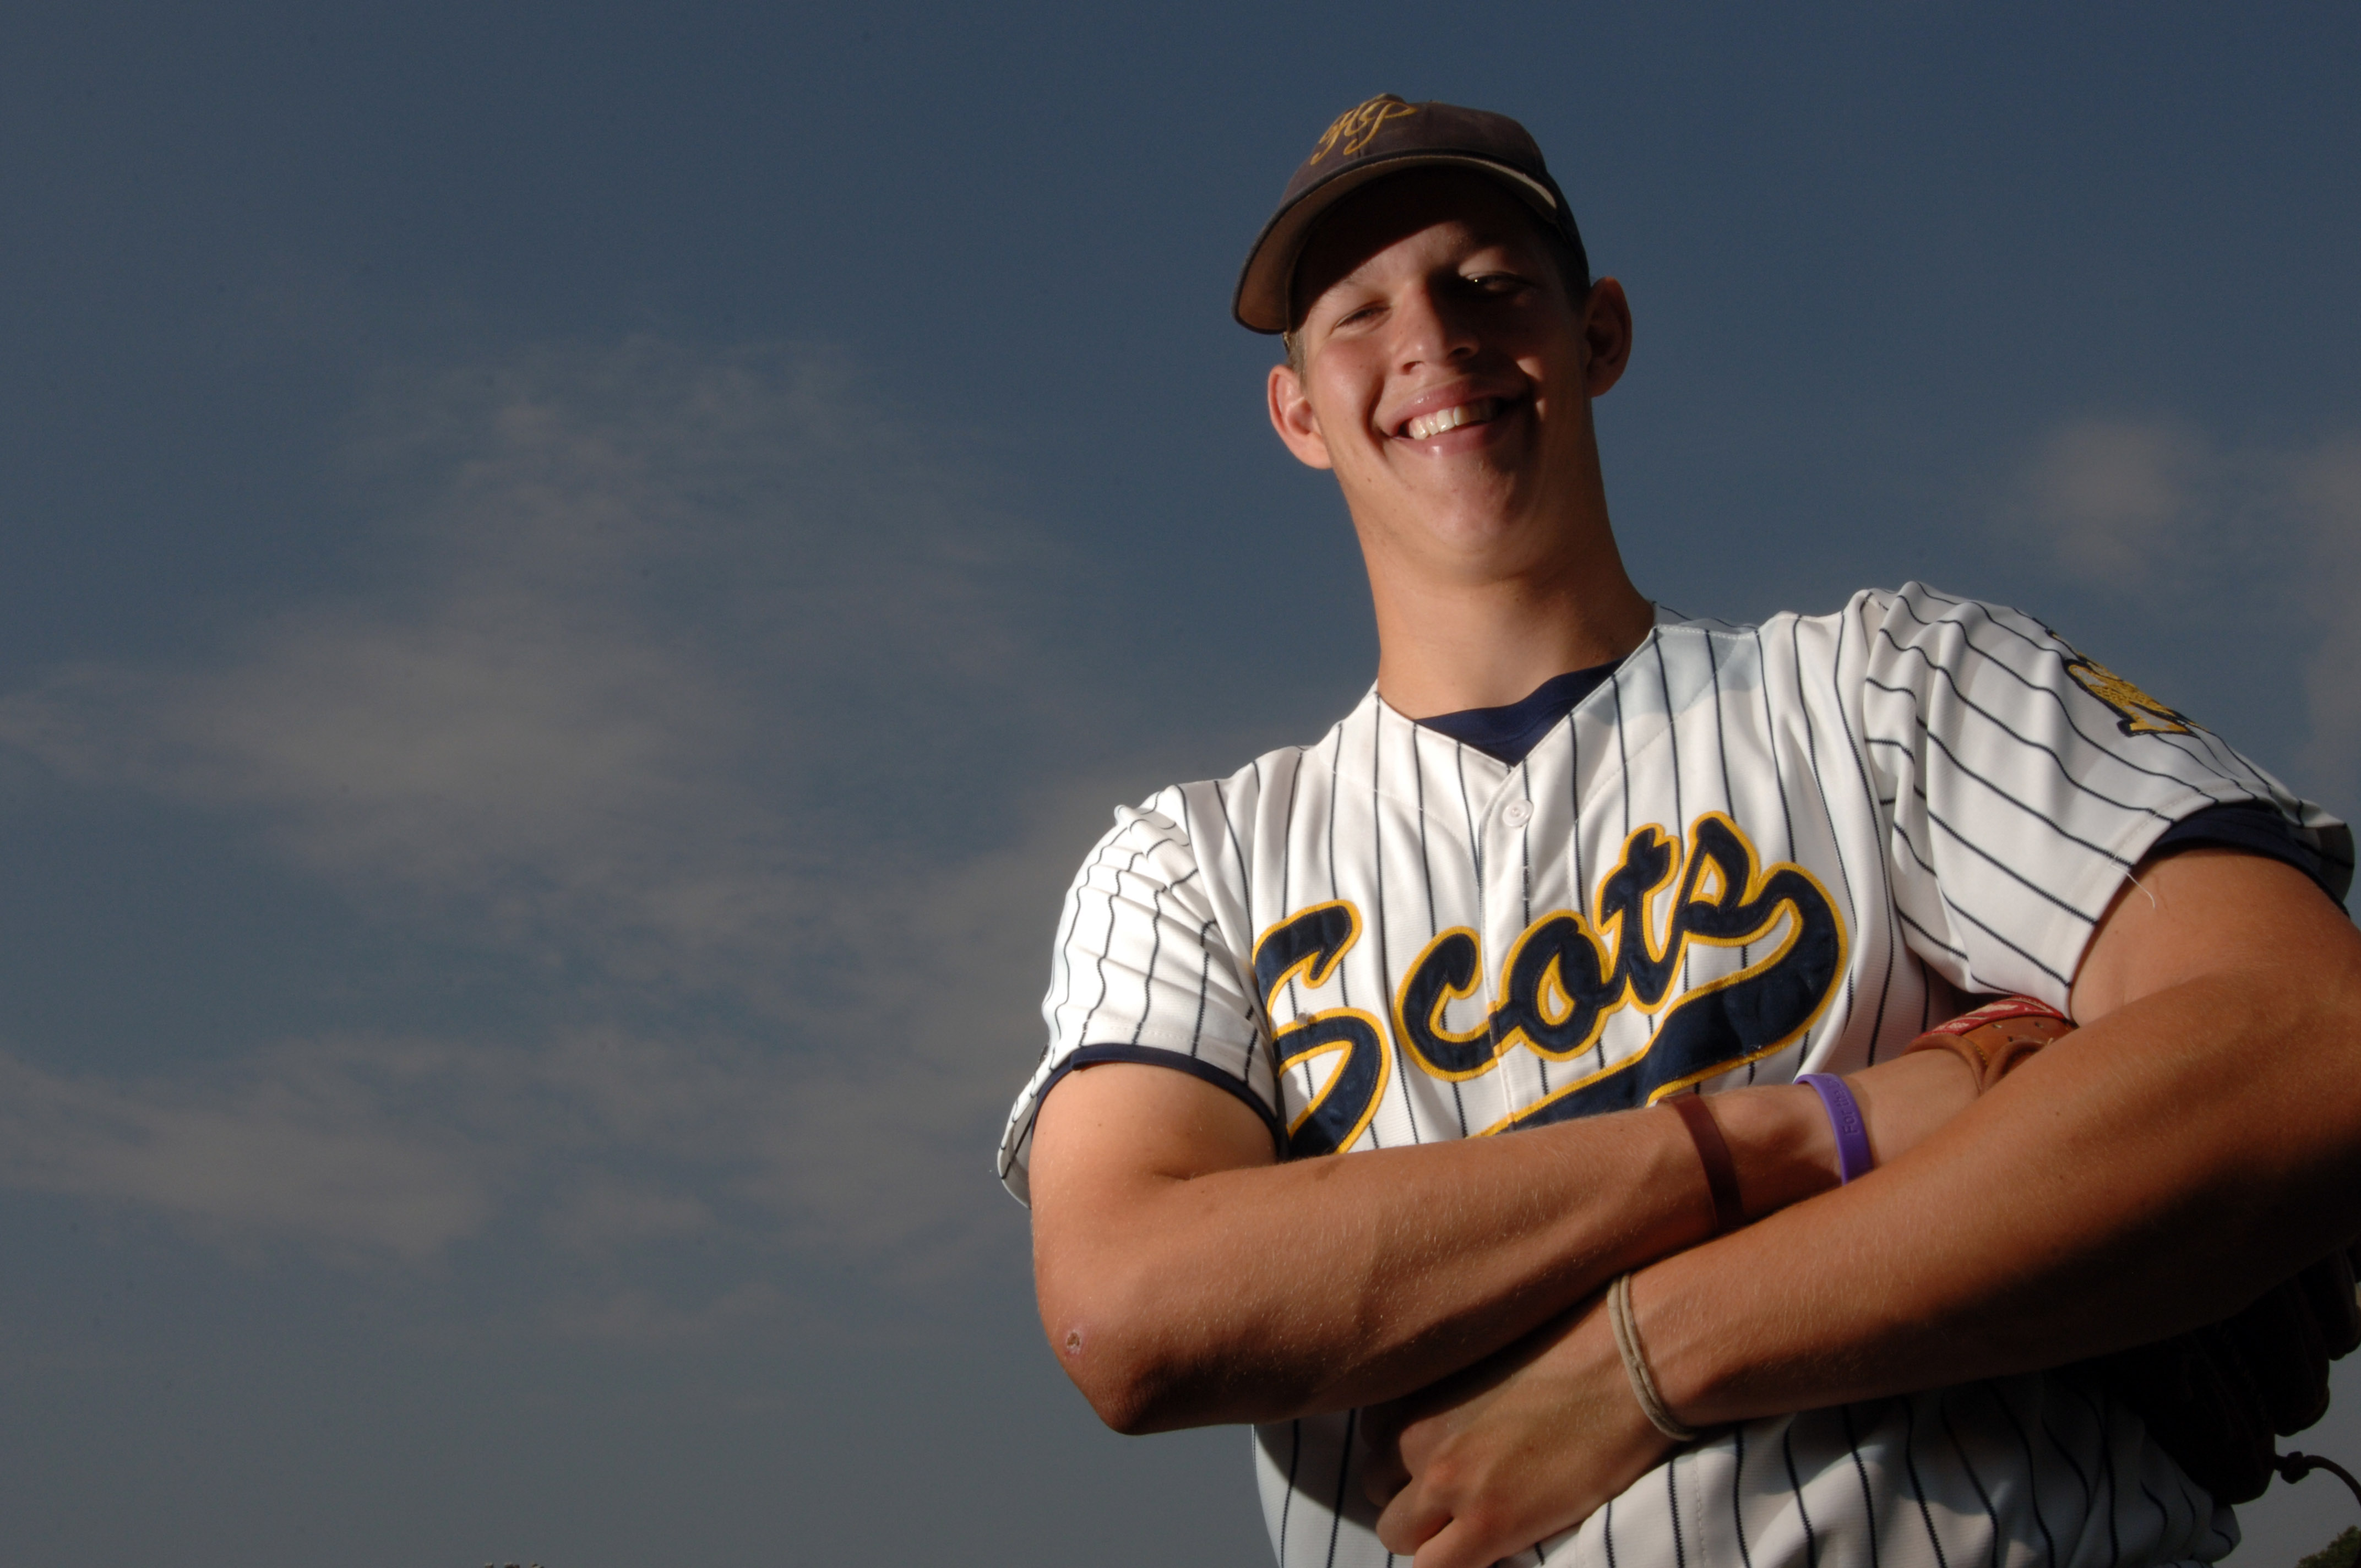 TBT: Before becoming Dodgers' longtime ace, Clayton Kershaw was 2006  ALL-USA Player of the Year